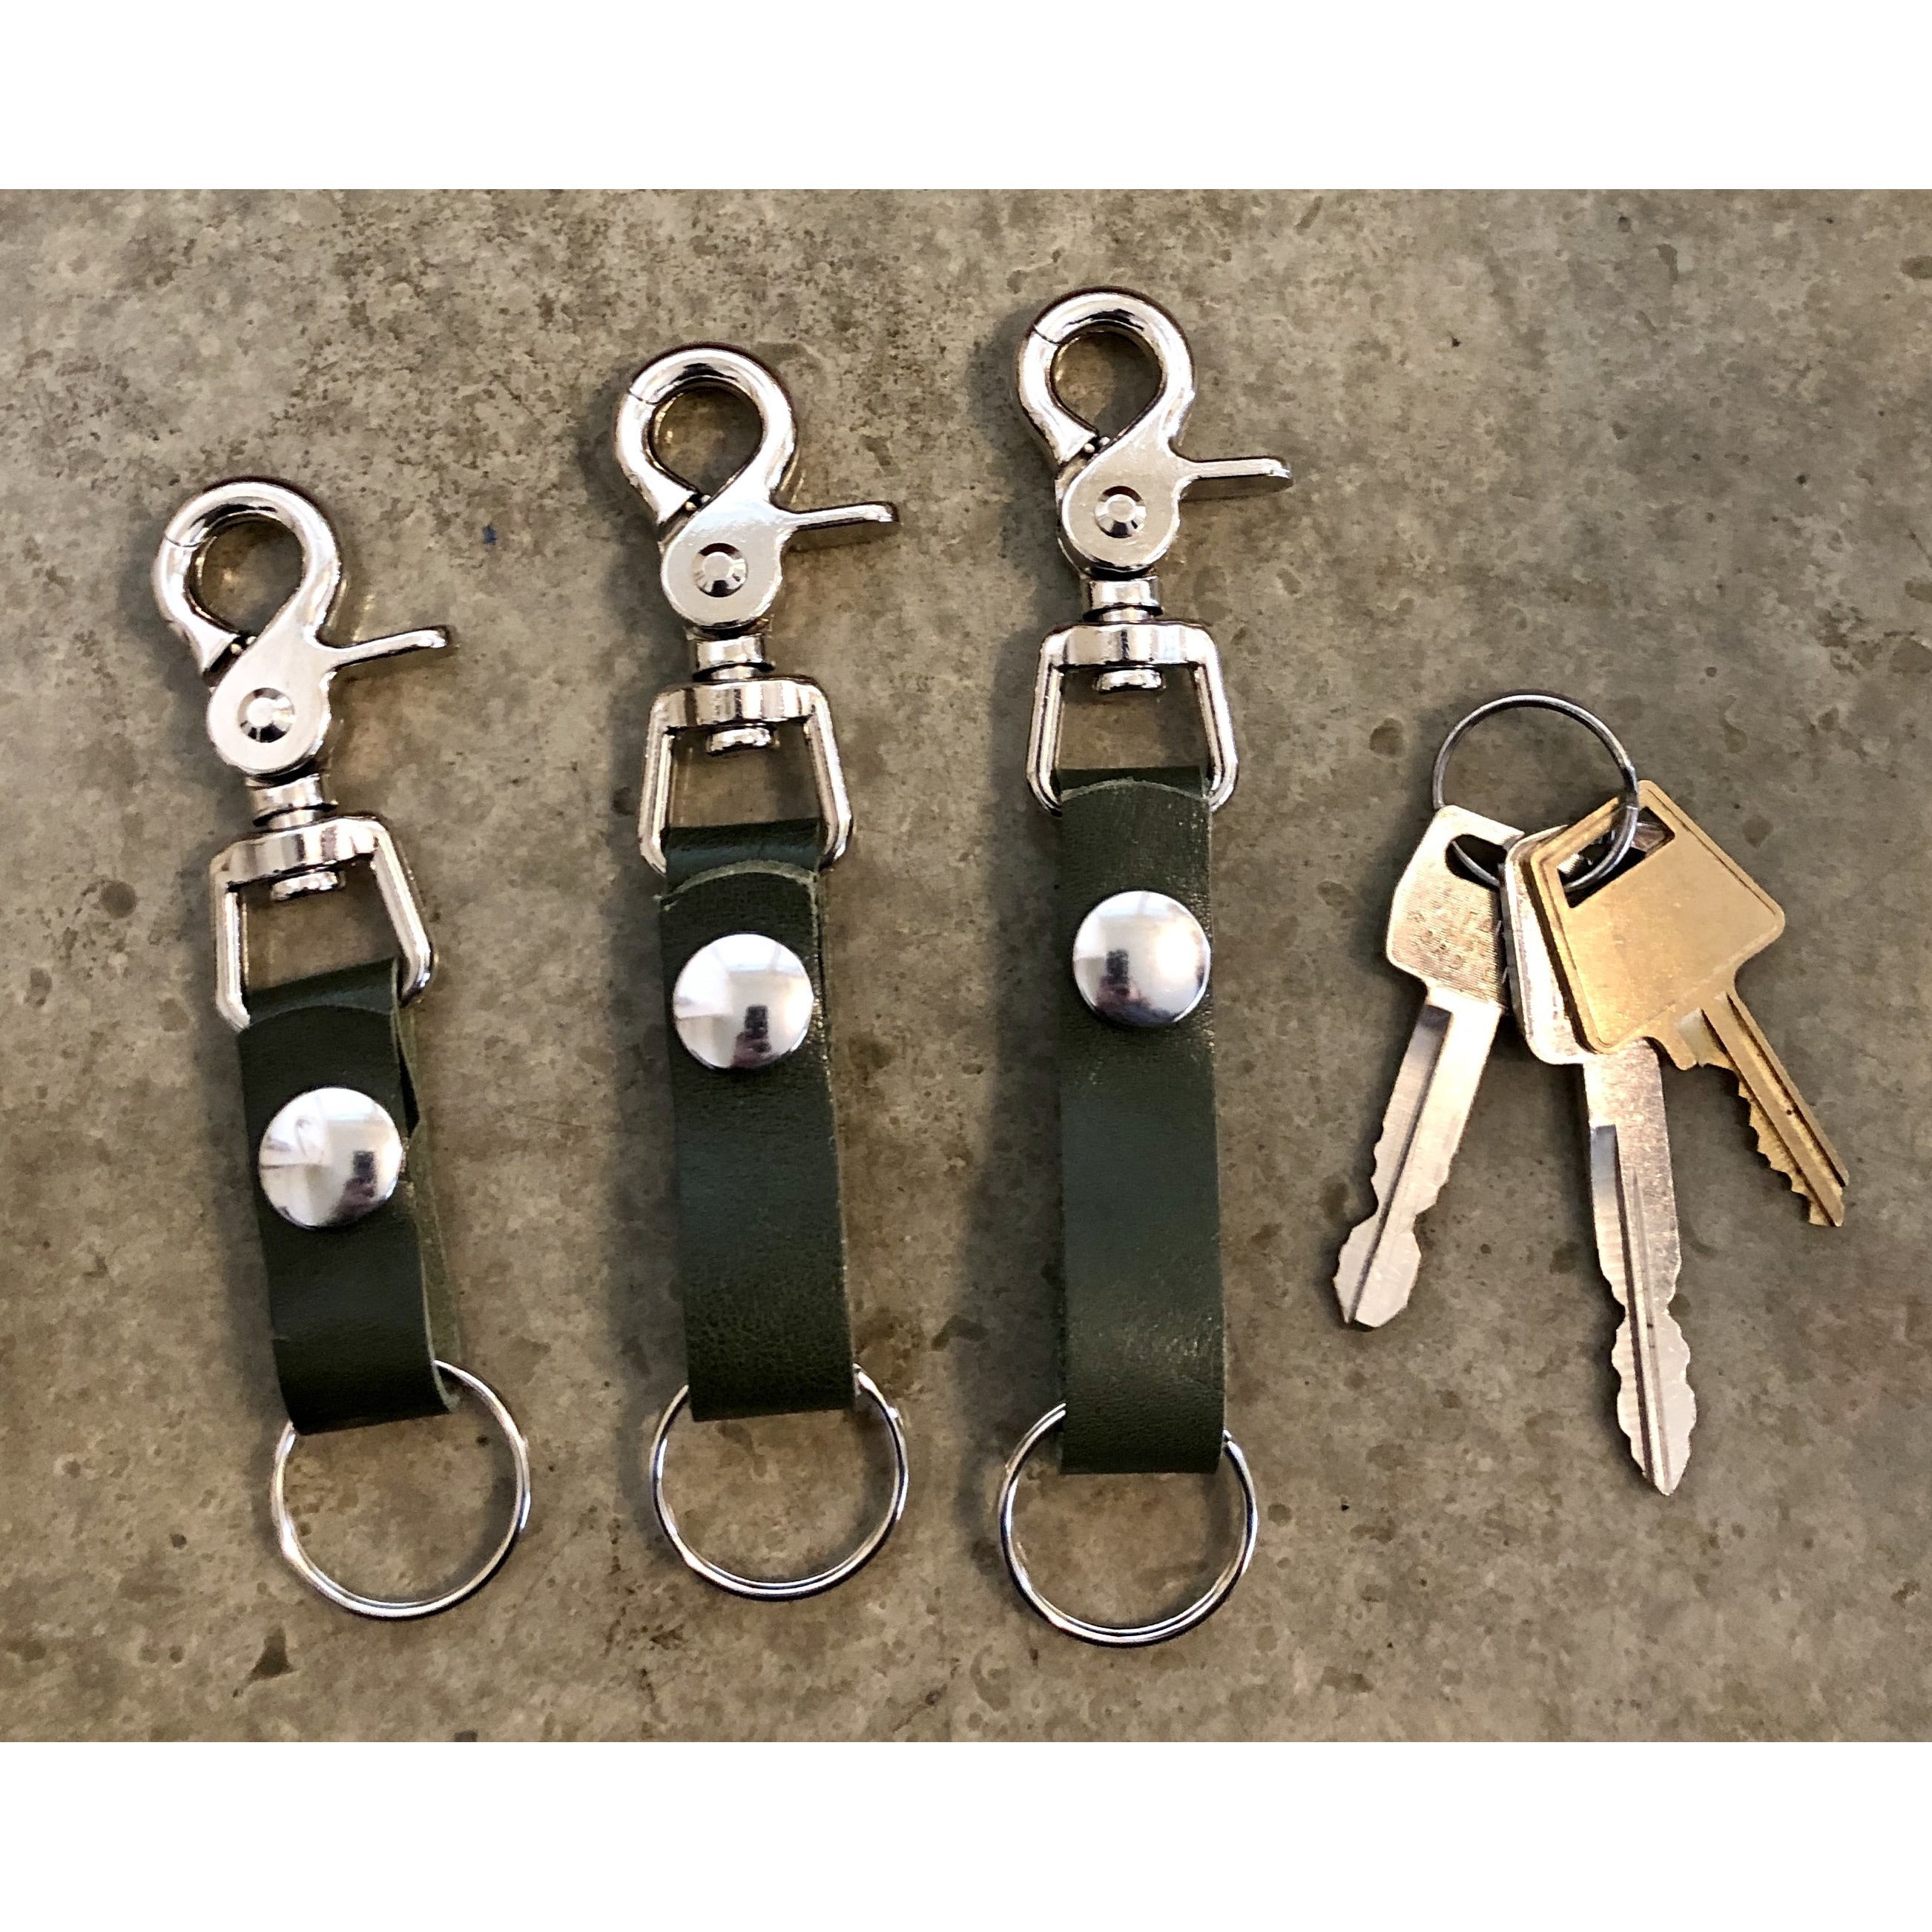 Leather Key Chain in Forest Green: short, medium, and long